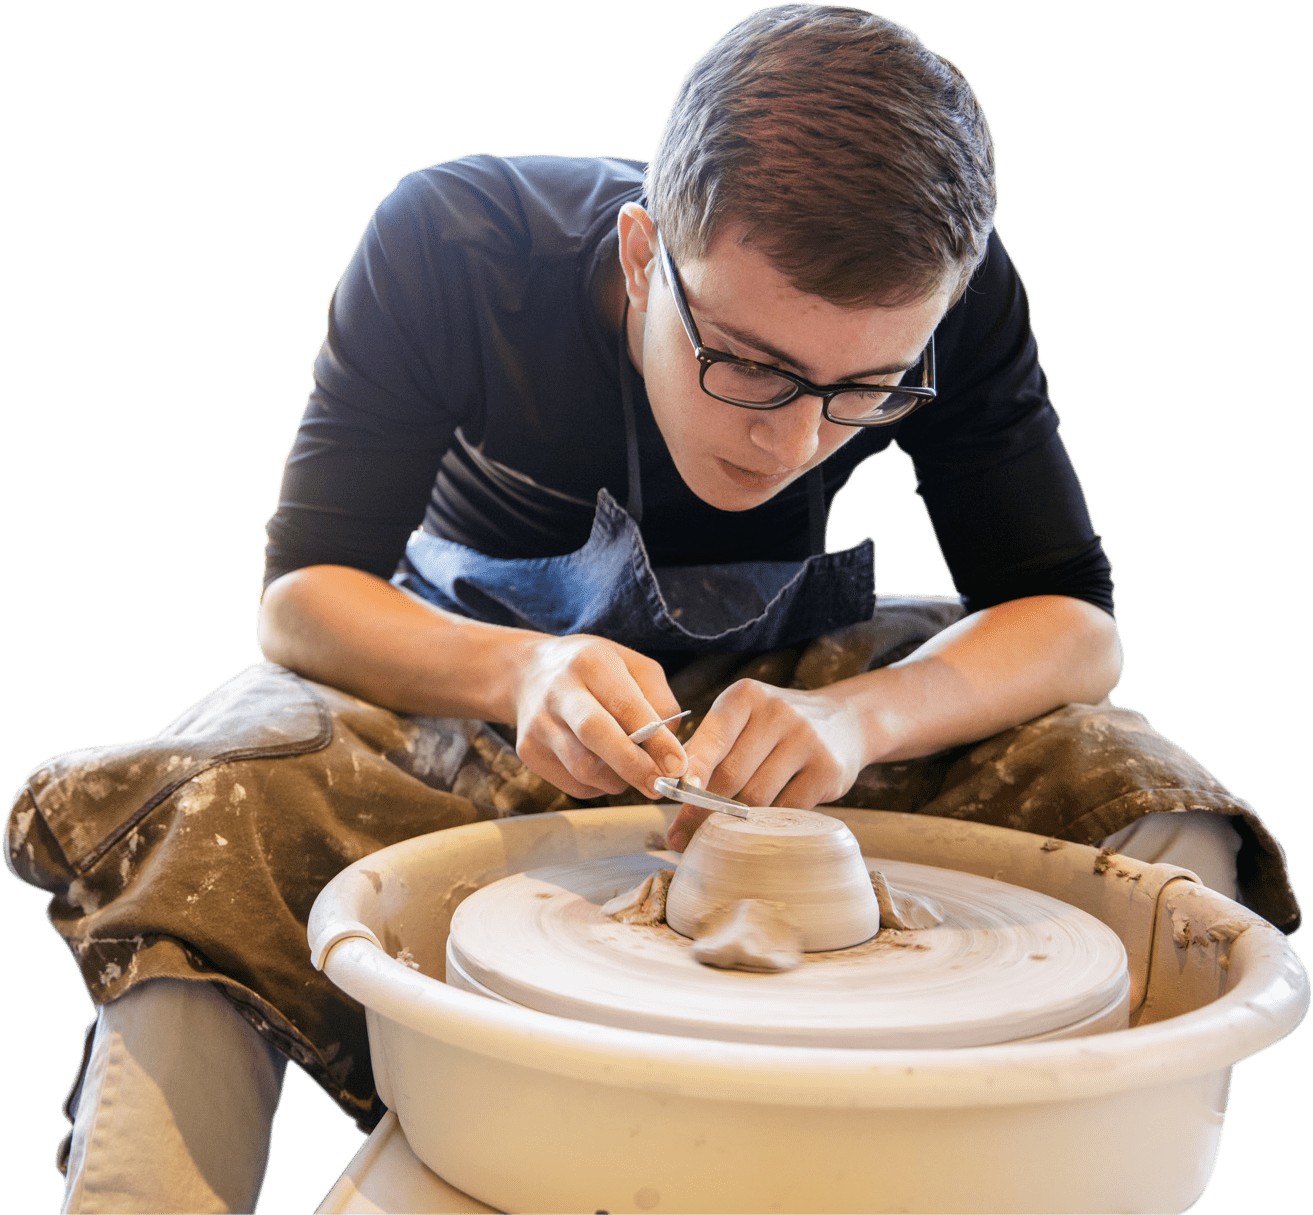 Dane working at Potters Wheel